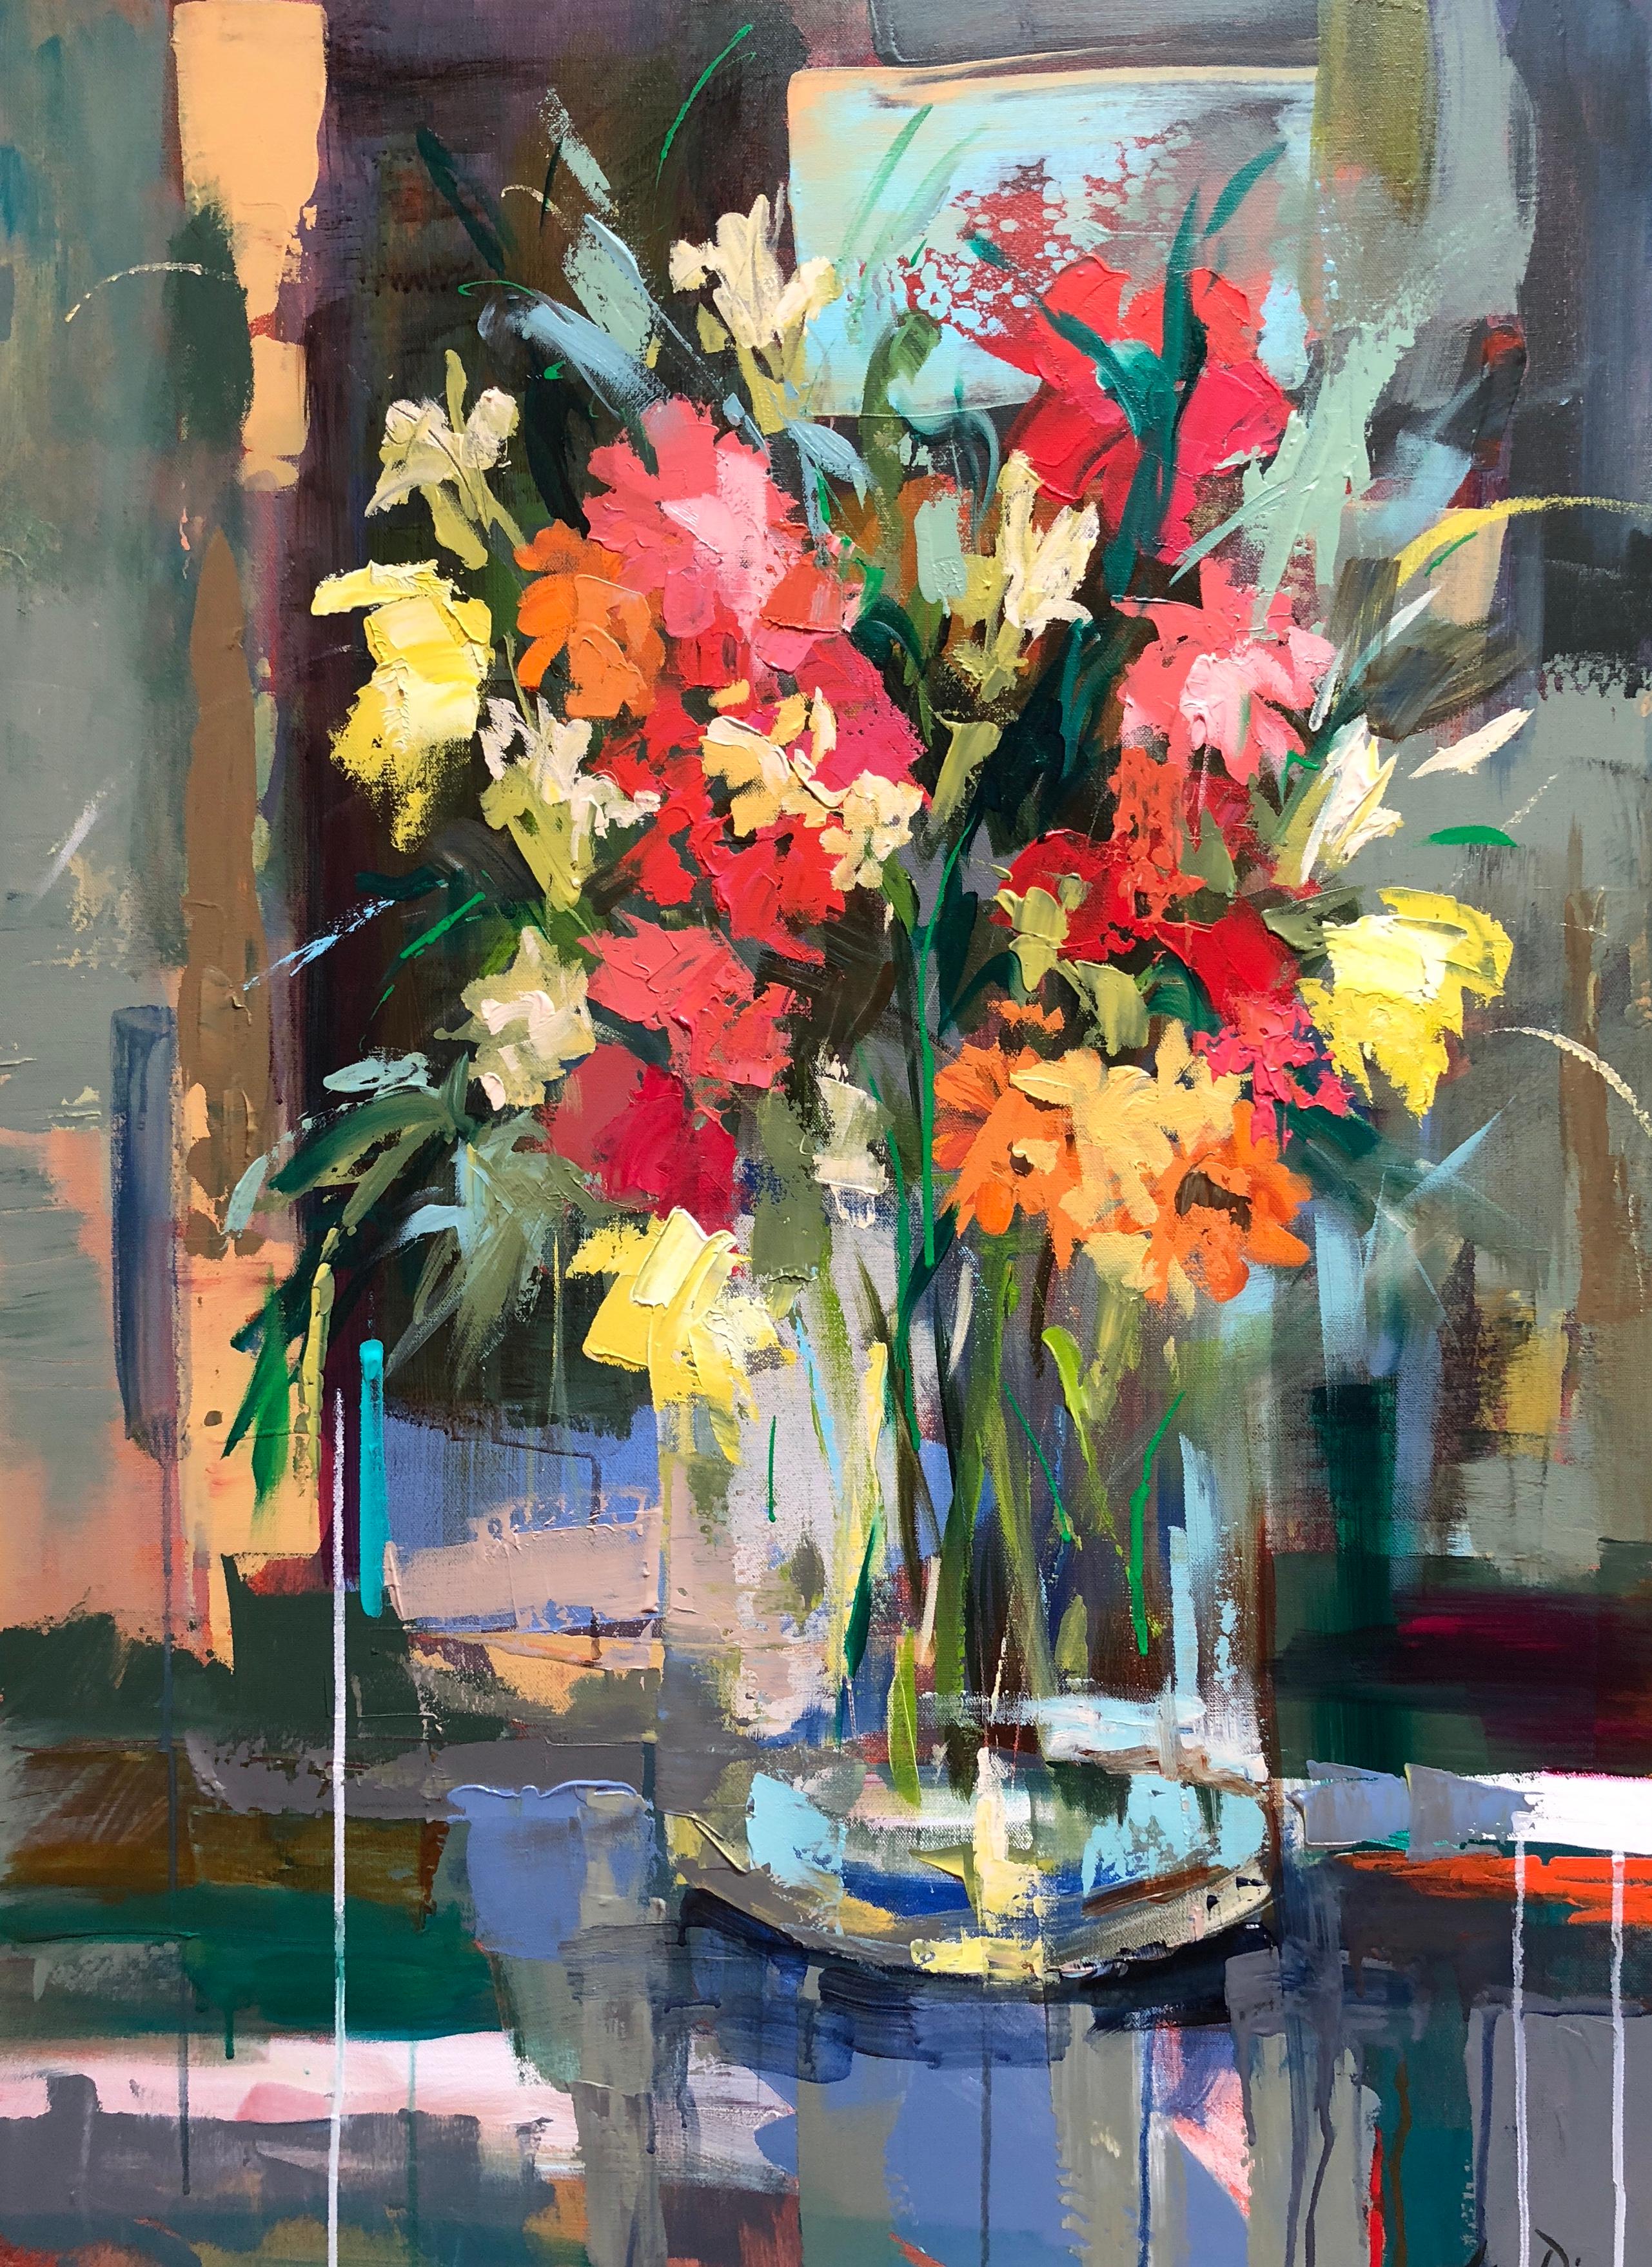 Ferry Building Flower Market, is a vertical acrylic on canvas abstract floral still-life painting created by American artist Amy Dixon in 2018. Featuring a vibrant palette made of a variety of colors such as red, orange, yellow, blue, green and